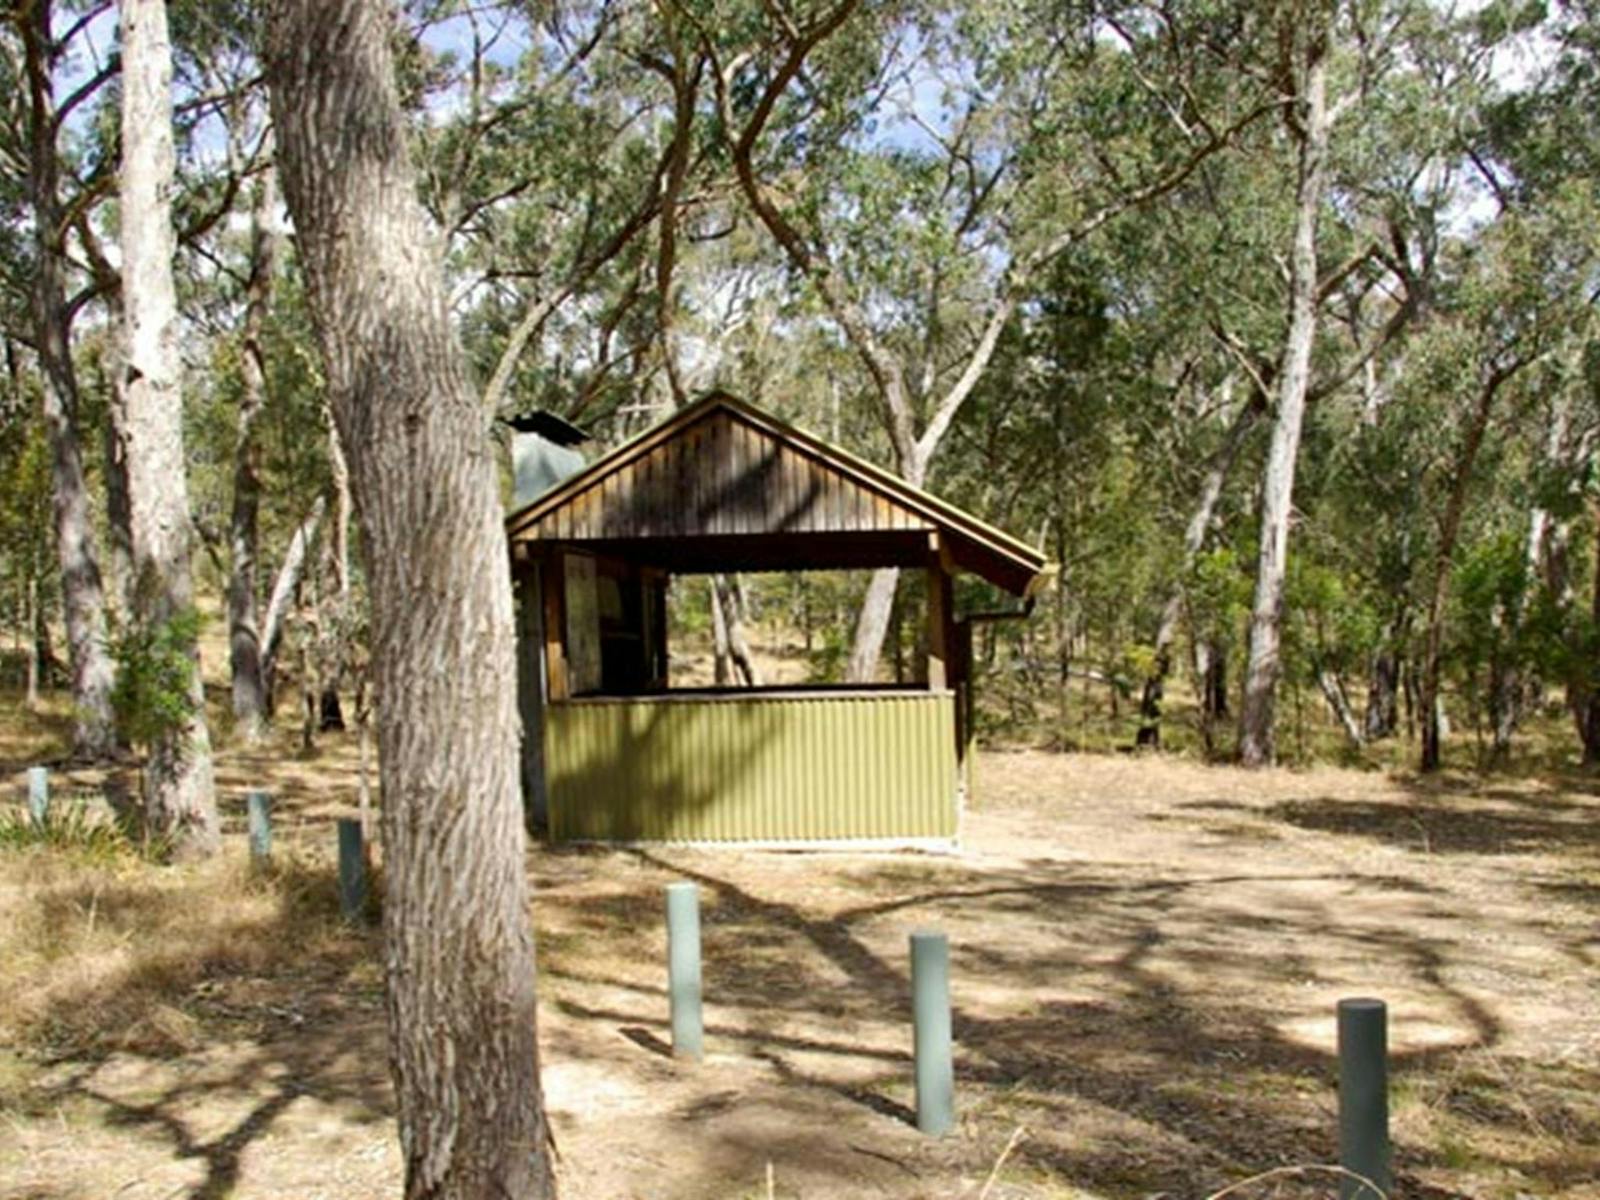 Budds Mare Campground, Oxley Wild Rivers National Park. Photo: Piers Thomas/NSW Government